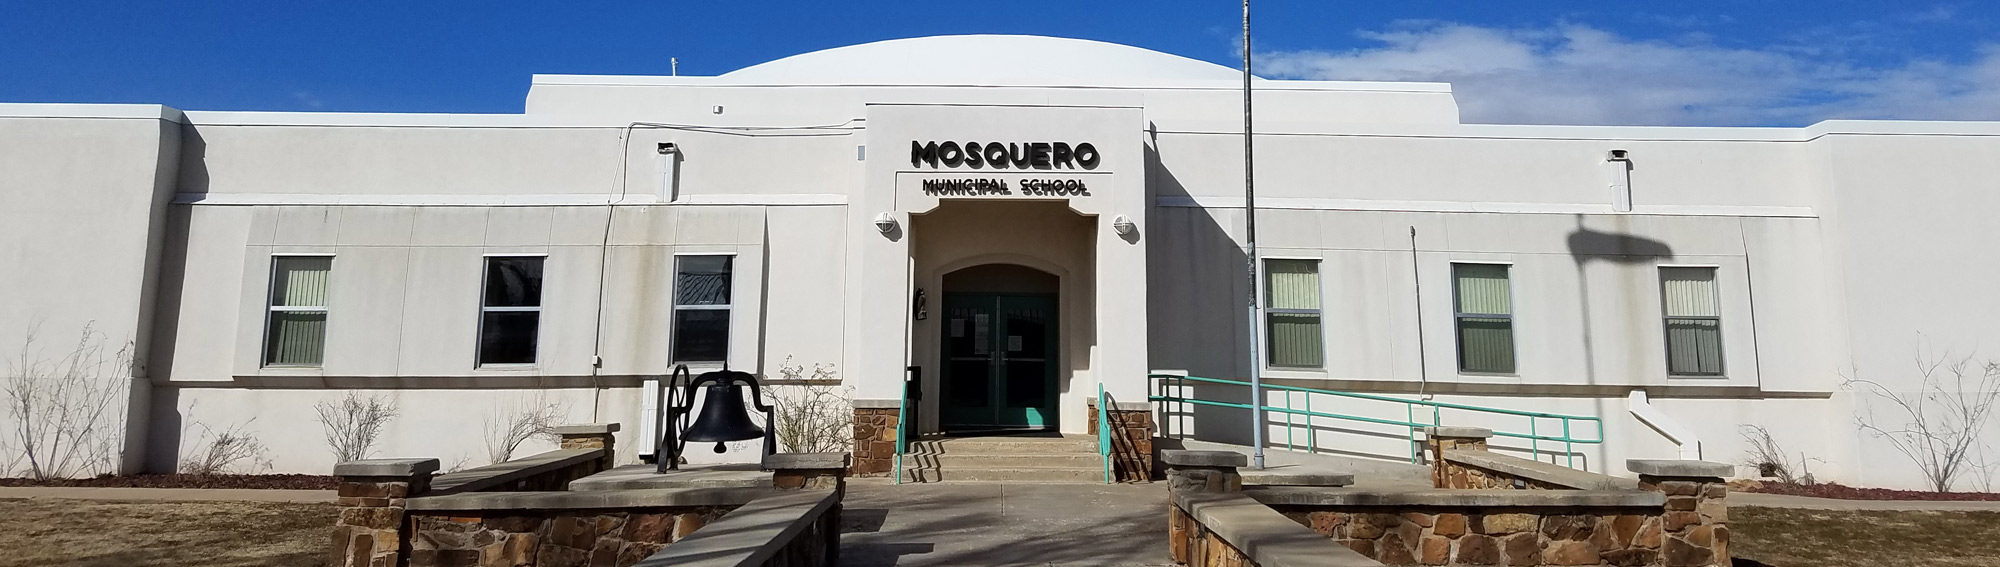 Front of the Mosquero Municipal School building